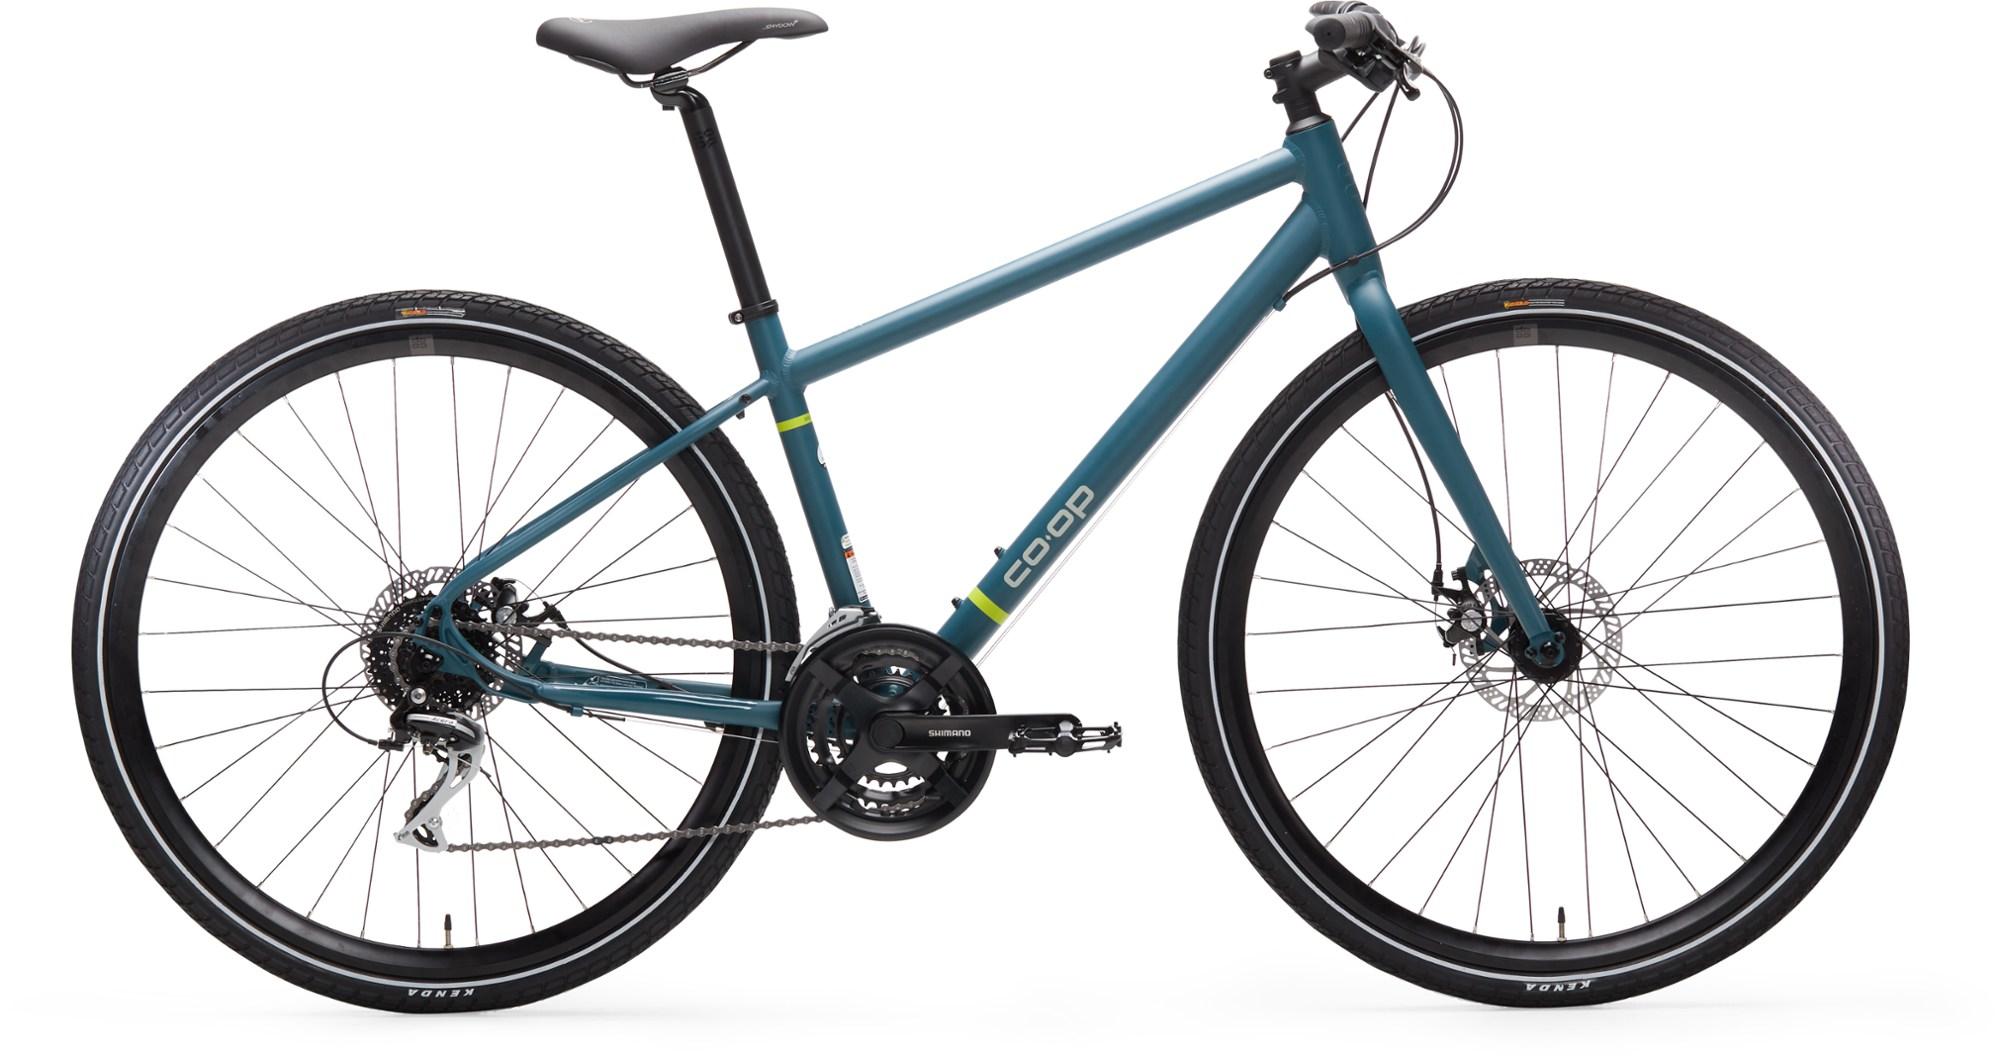 REI Co-op Cycles CTY 1.1 Bike for $448.93